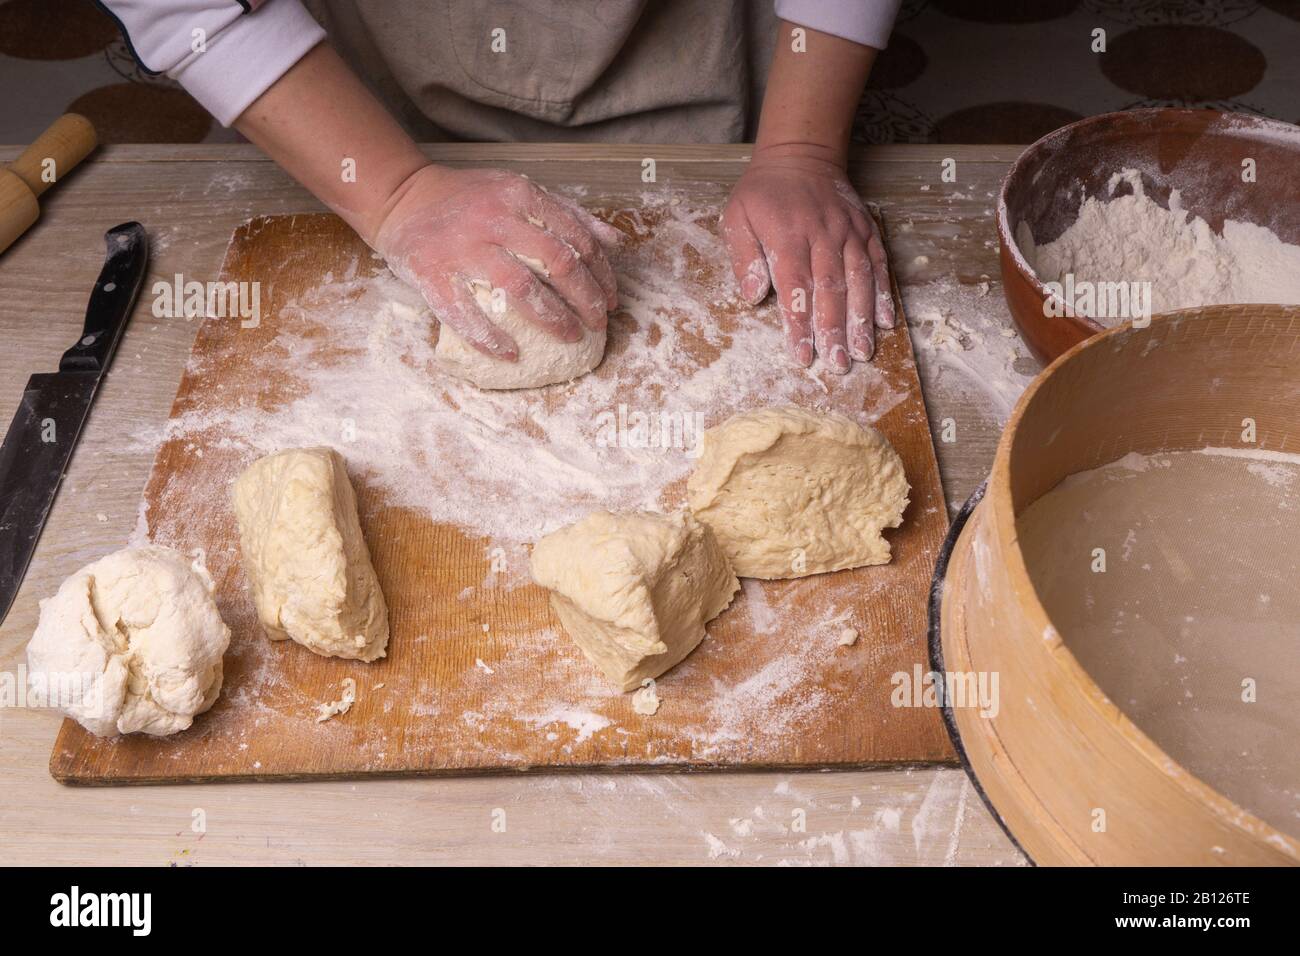 A woman kneads the dough. Plywood cutting board, wooden flour sieve and wooden rolling pin - tools for making dough. Stock Photo